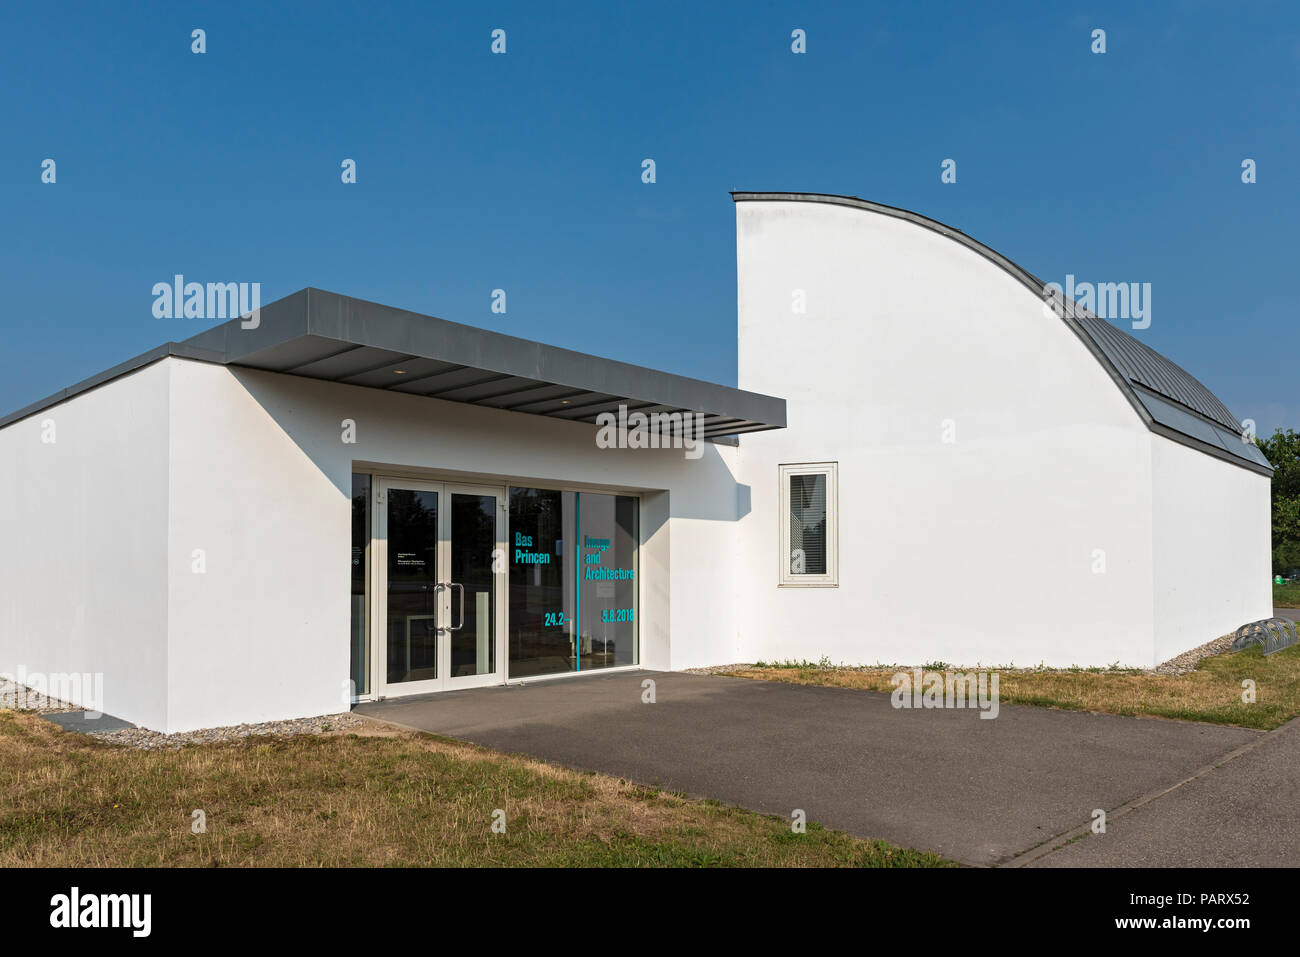 Vitra Design Museum Gallery building by Frank Gehry in Weil am Rhein, Germany Stock Photo